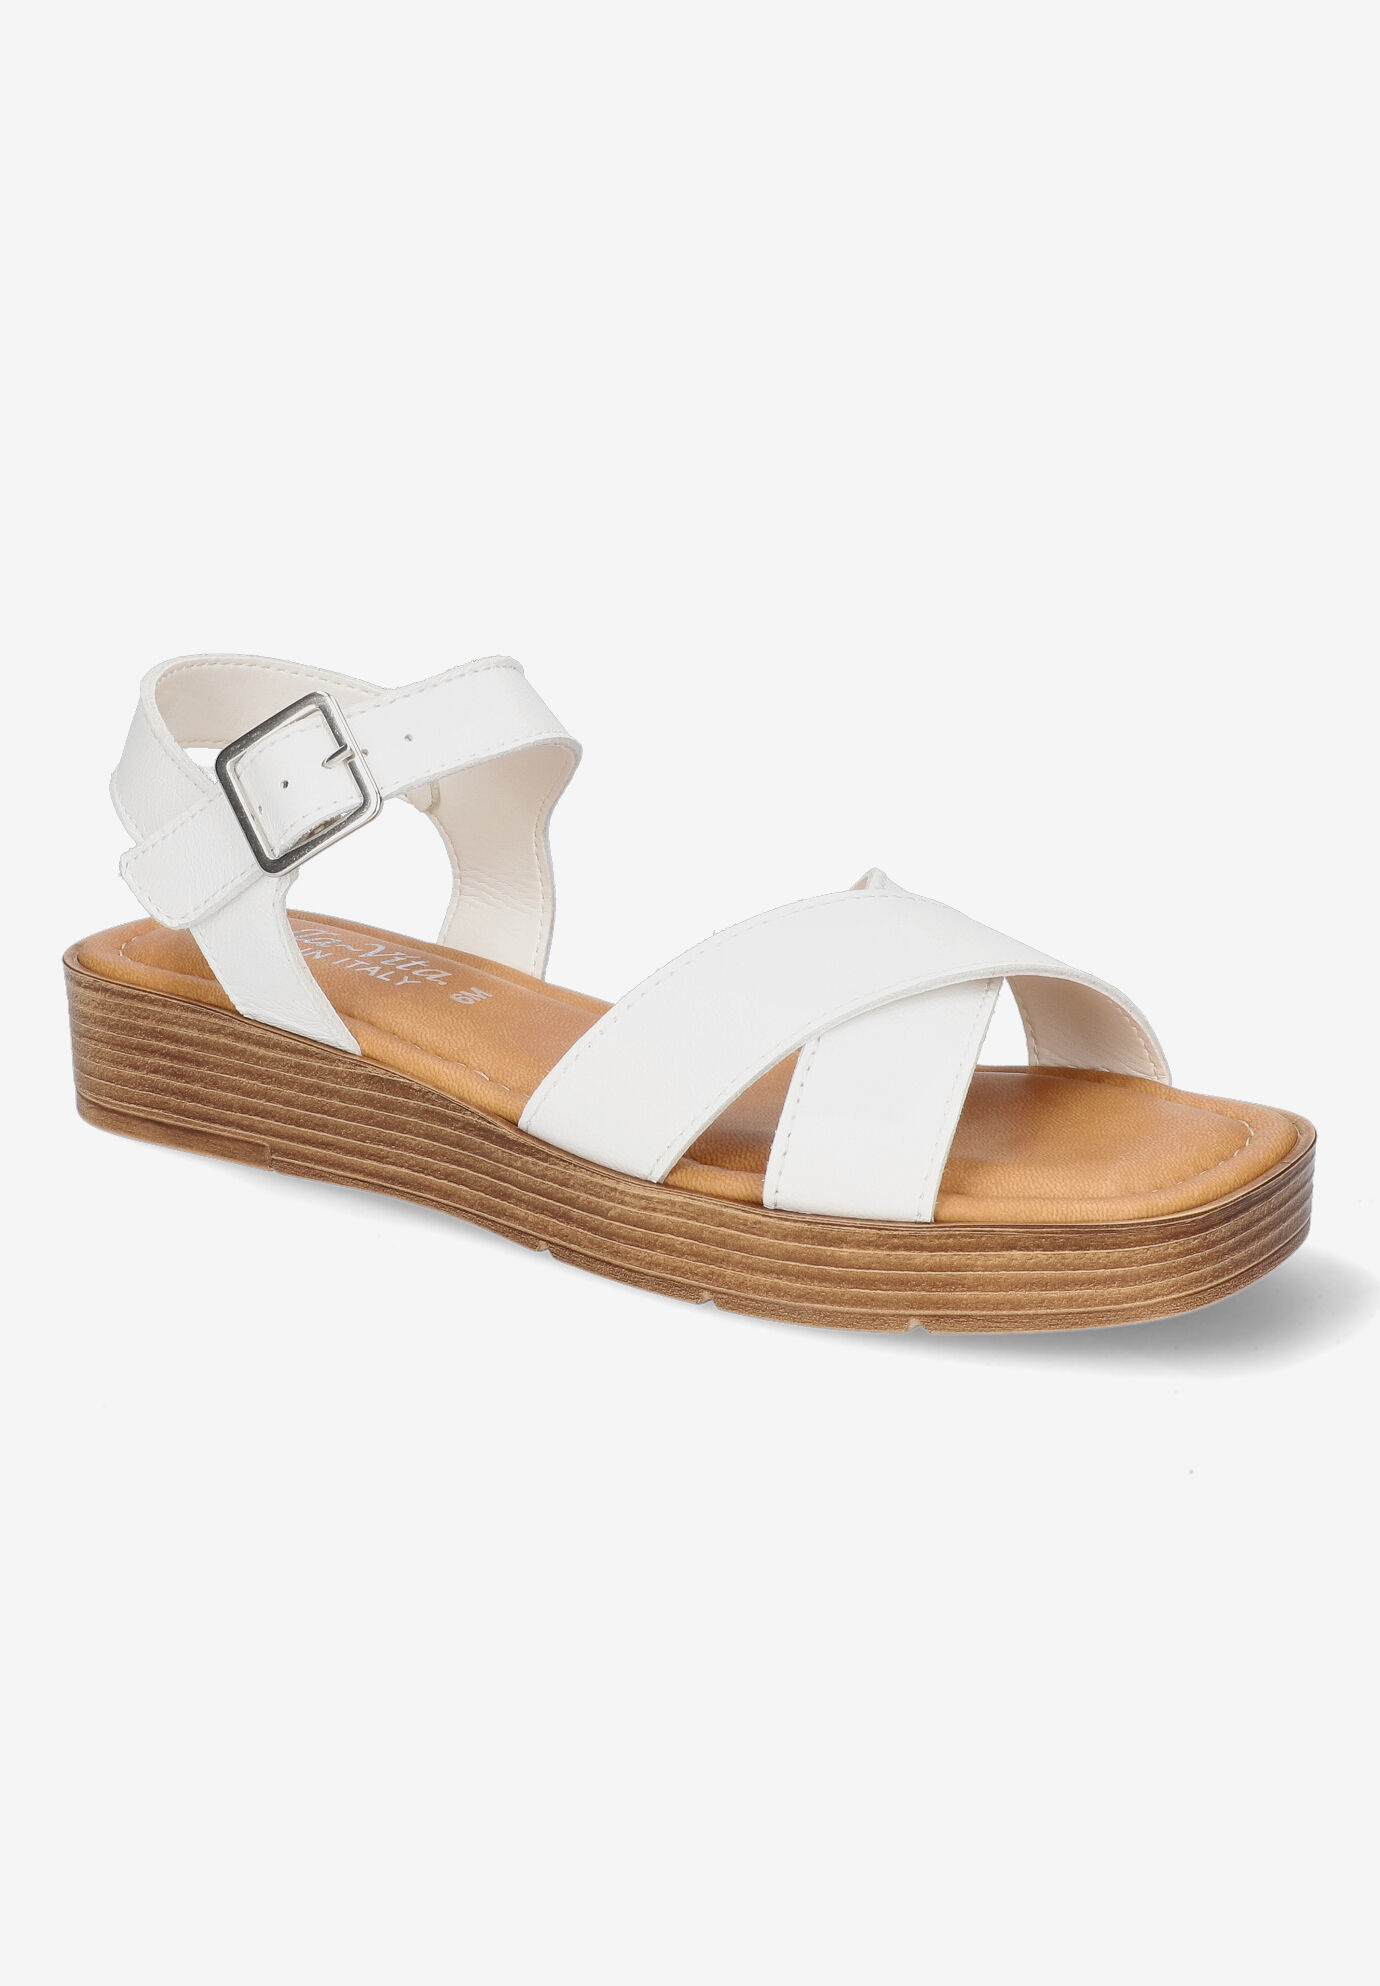 Extra Wide Width Women's Car-Italy Sandal by Bella Vita in White Leather (Size 8 WW)